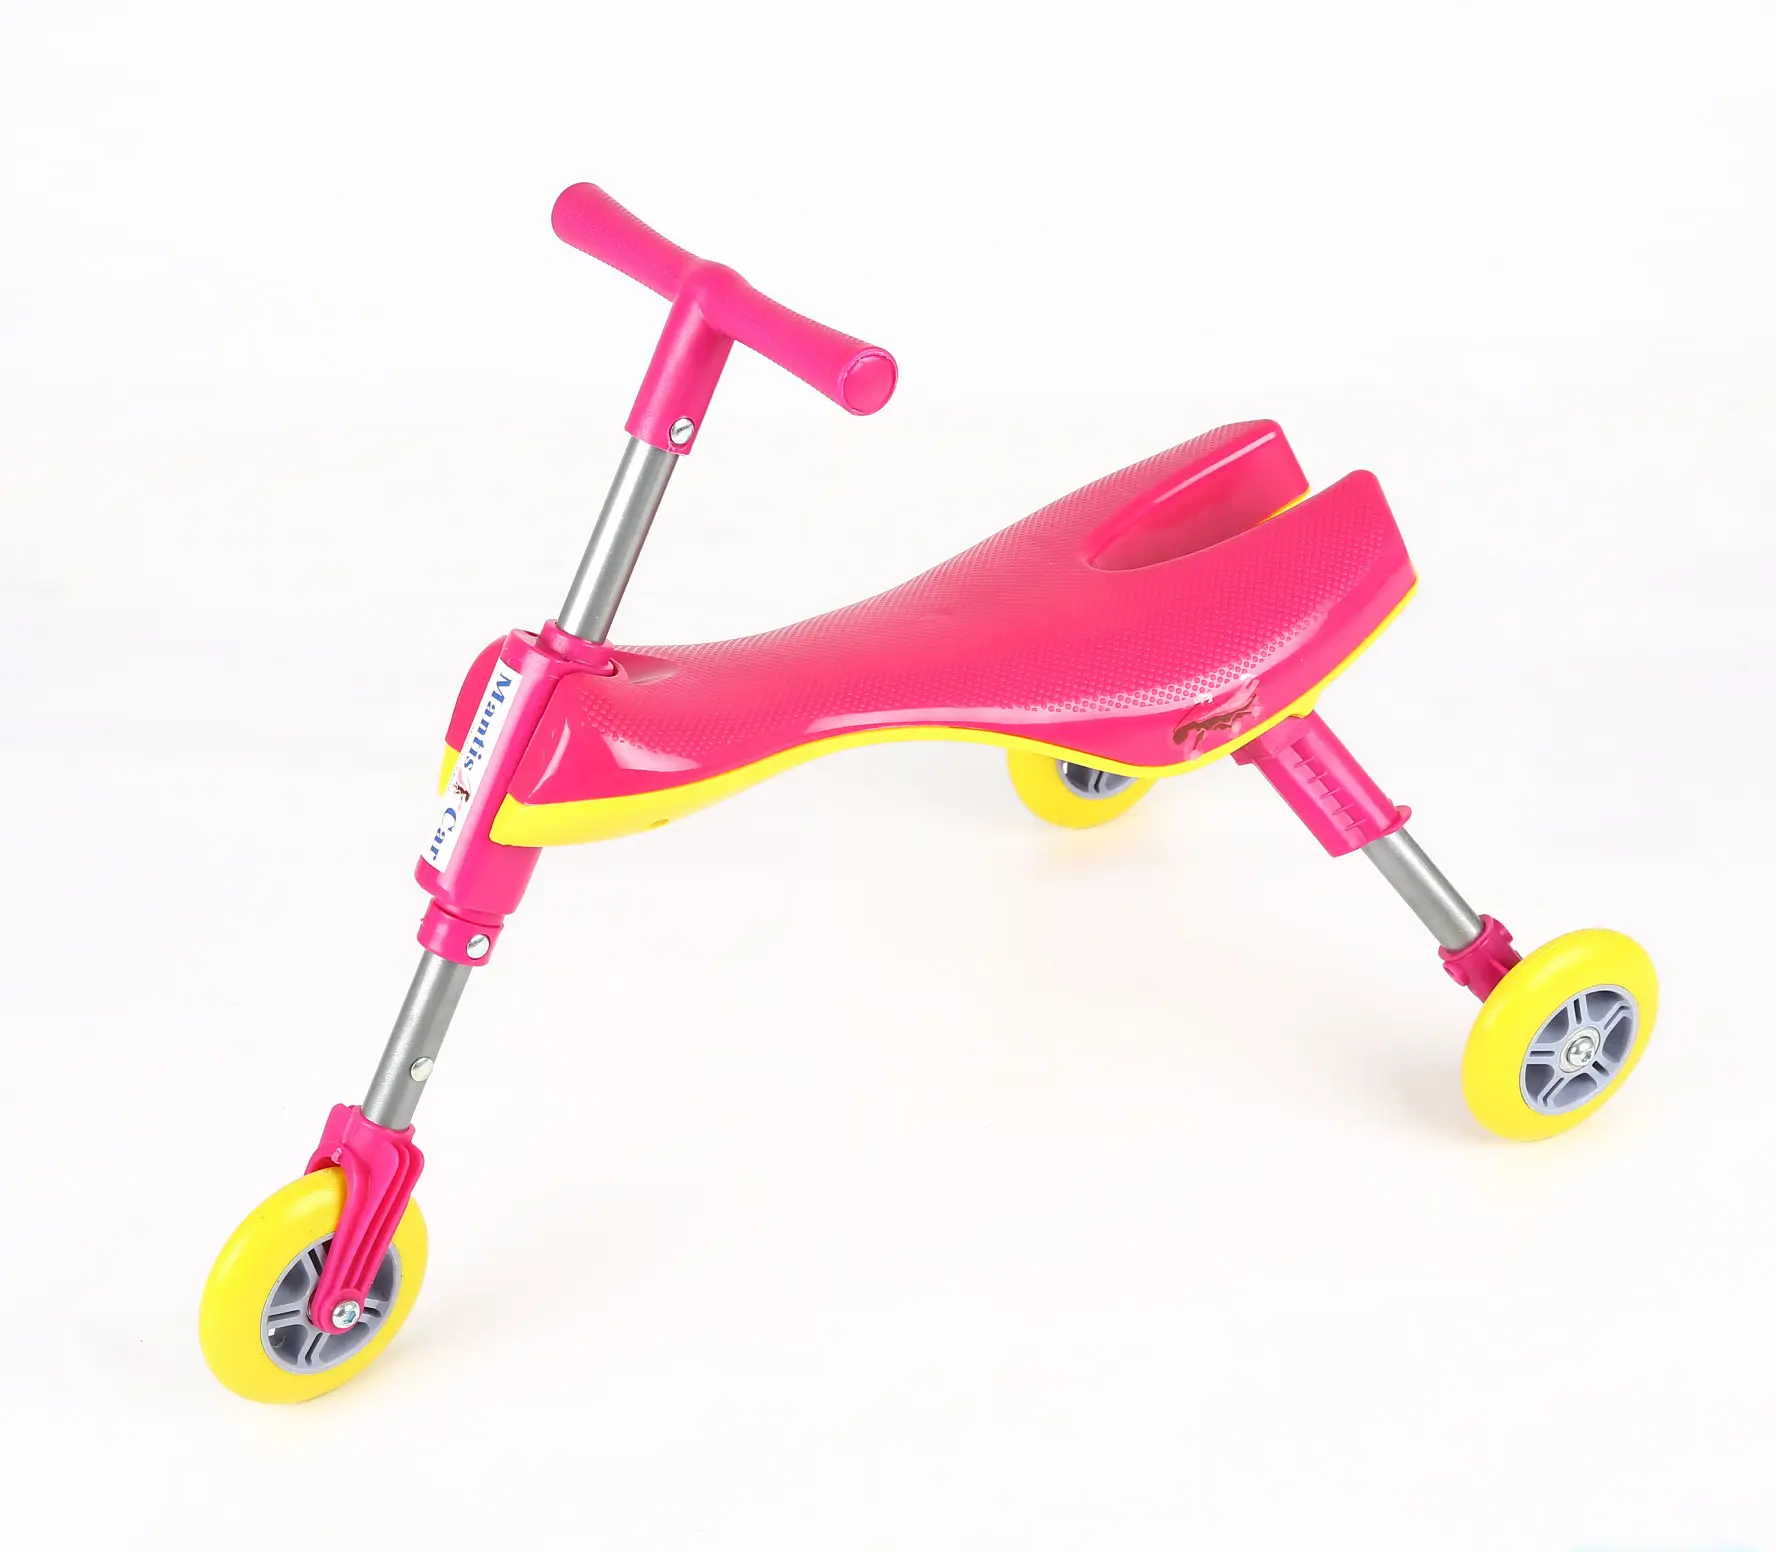 Scuttle Bug Kids Trike Scooter Toys Training Sports Gift Foldable For Middle East Irasel 3 Wheels